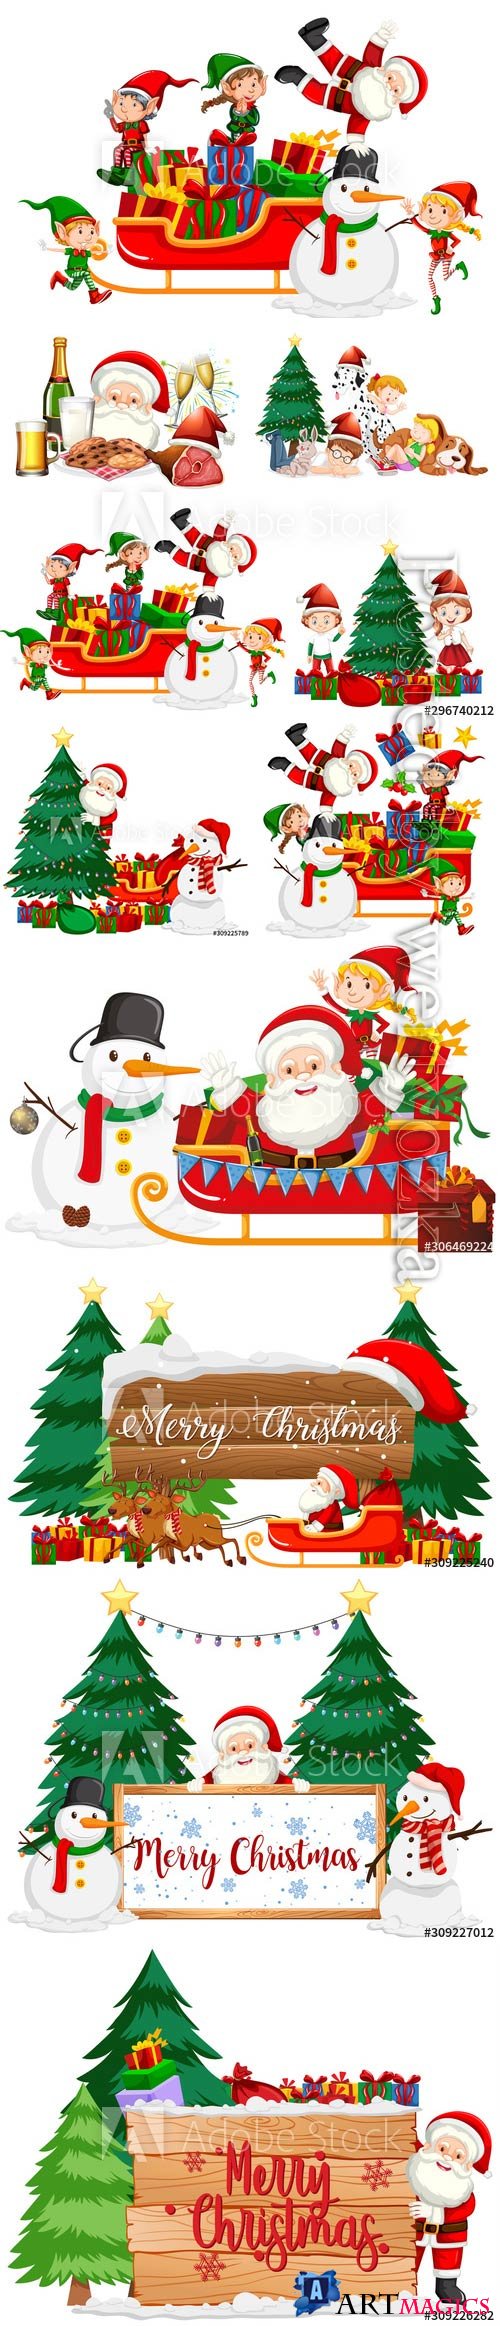 Christmas theme with ornaments on many products